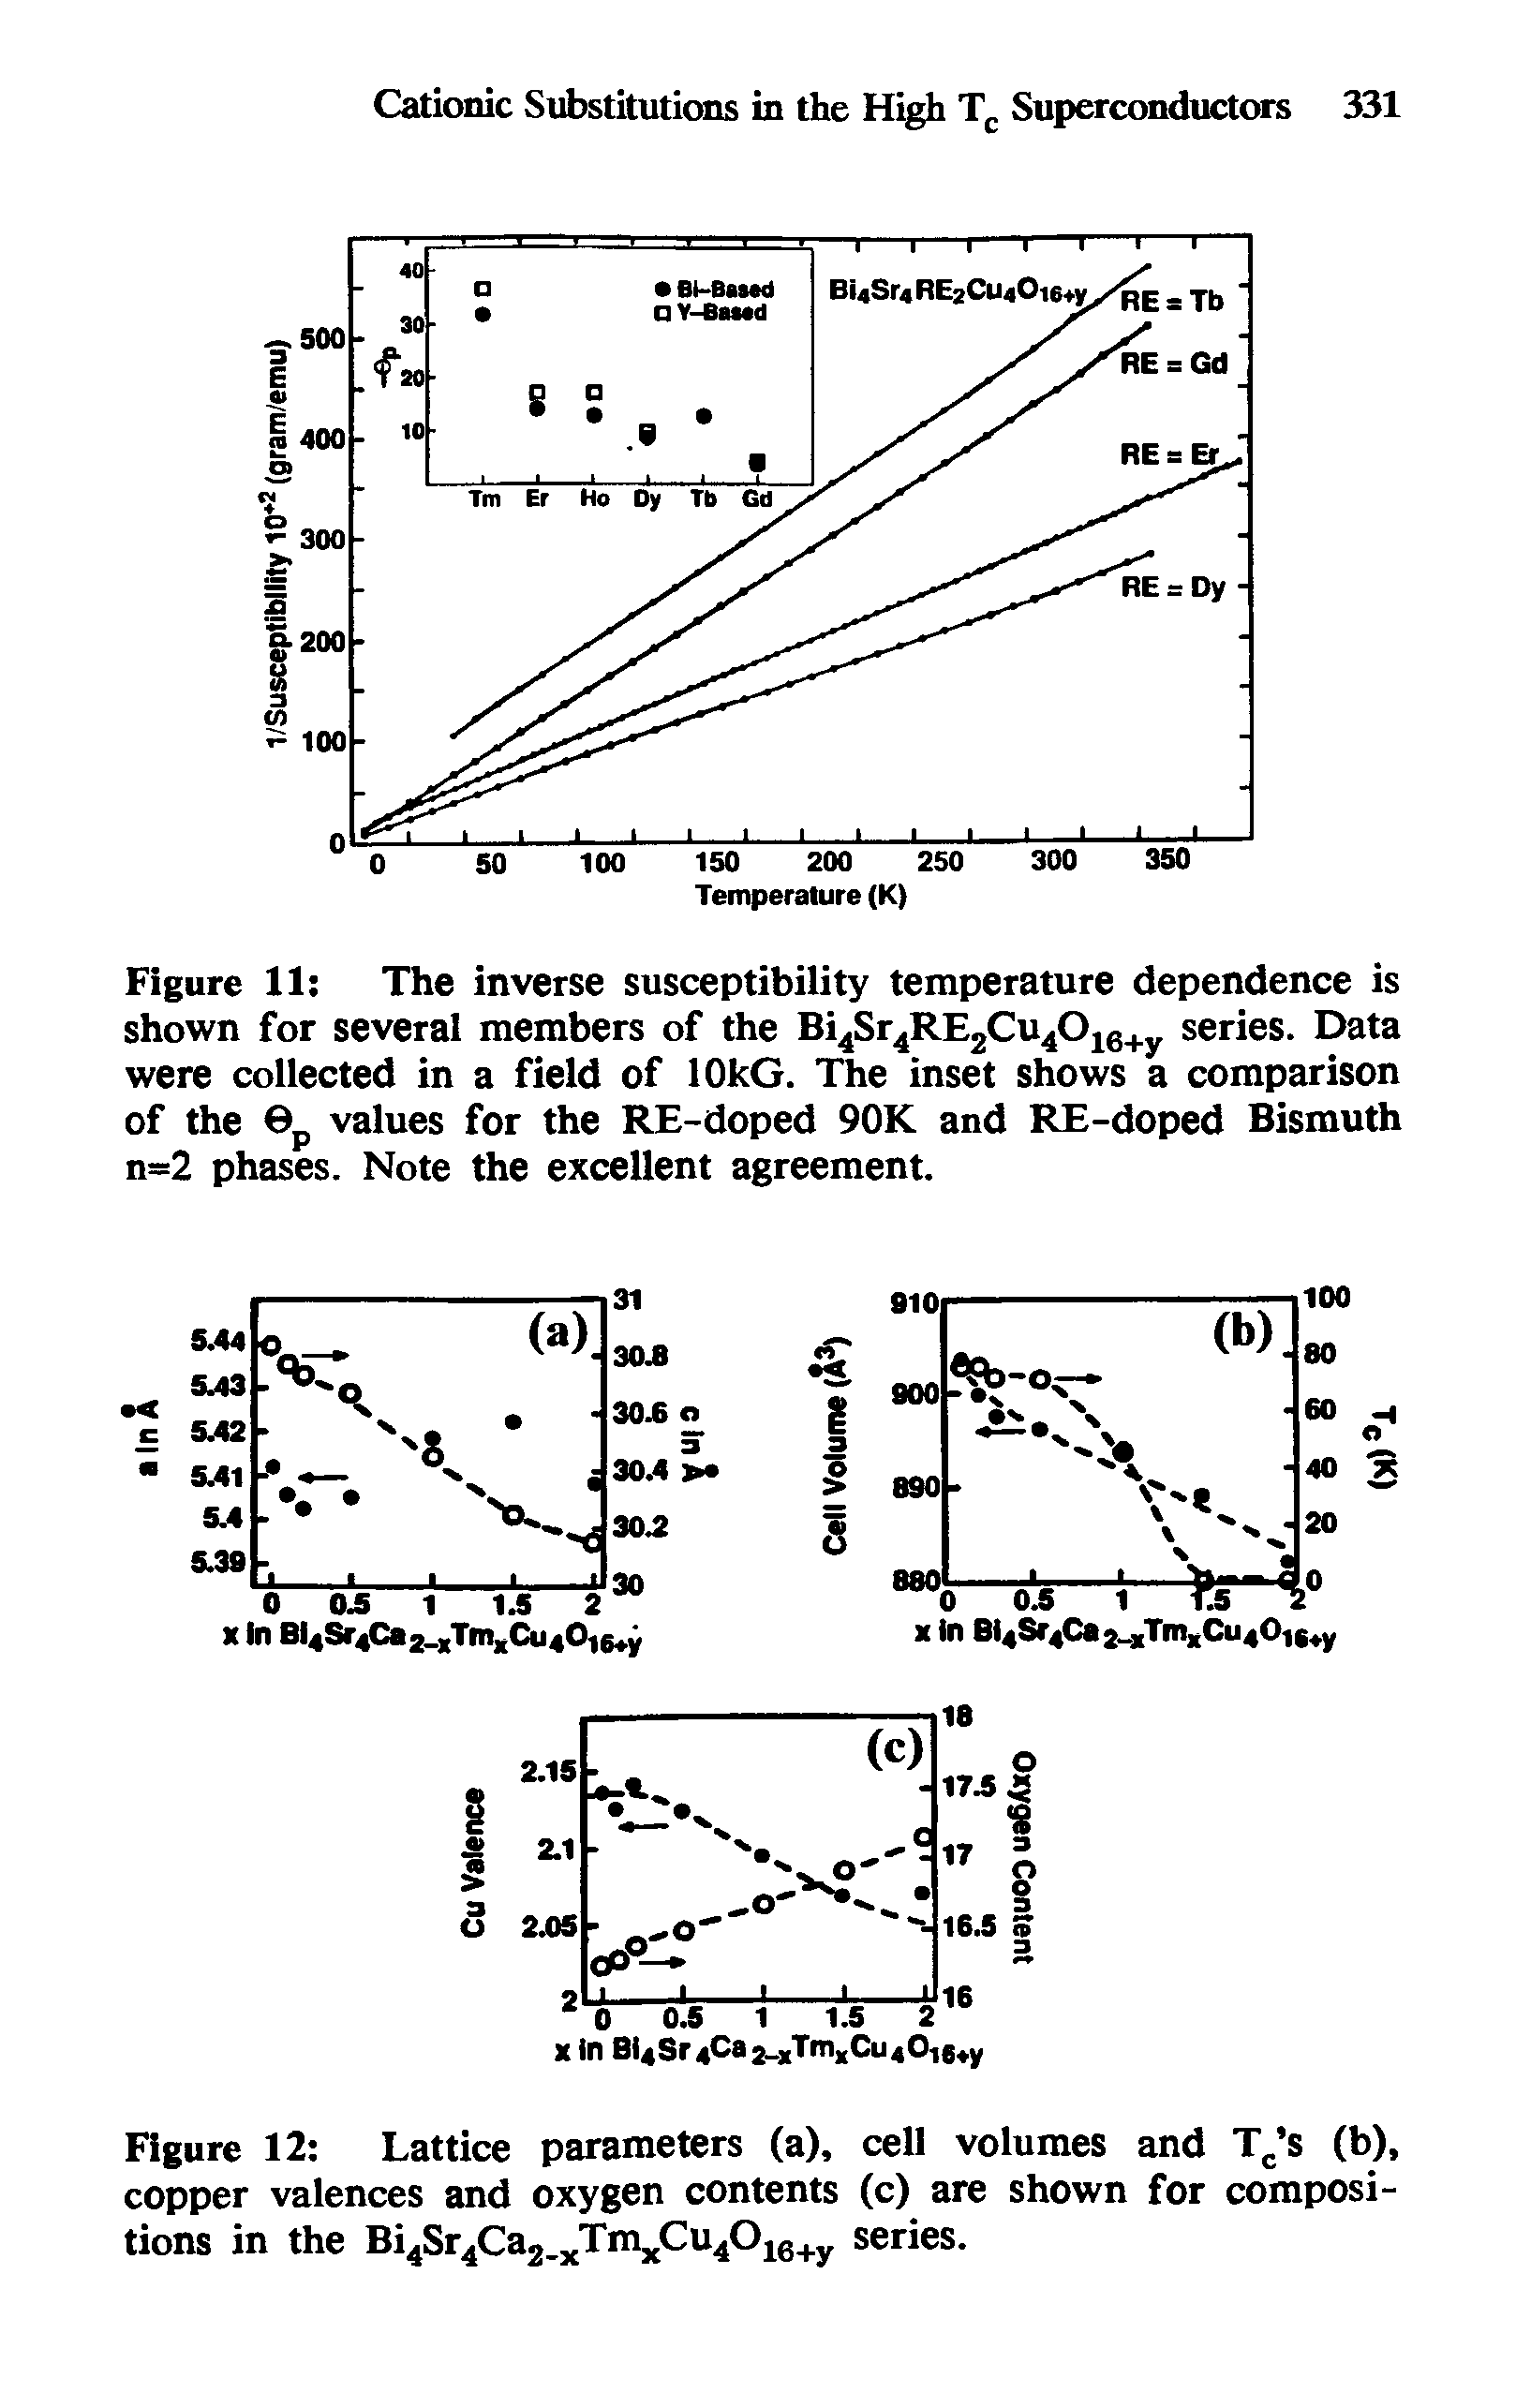 Figure 11 The inverse susceptibility temperature dependence is shown for several members of the Bi4Sr4RE2Cu4016+y series. Data were collected in a field of lOkG. The inset shows a comparison of the 0p values for the RE-doped 90K and RE-doped Bismuth n=2 phases. Note the excellent agreement.